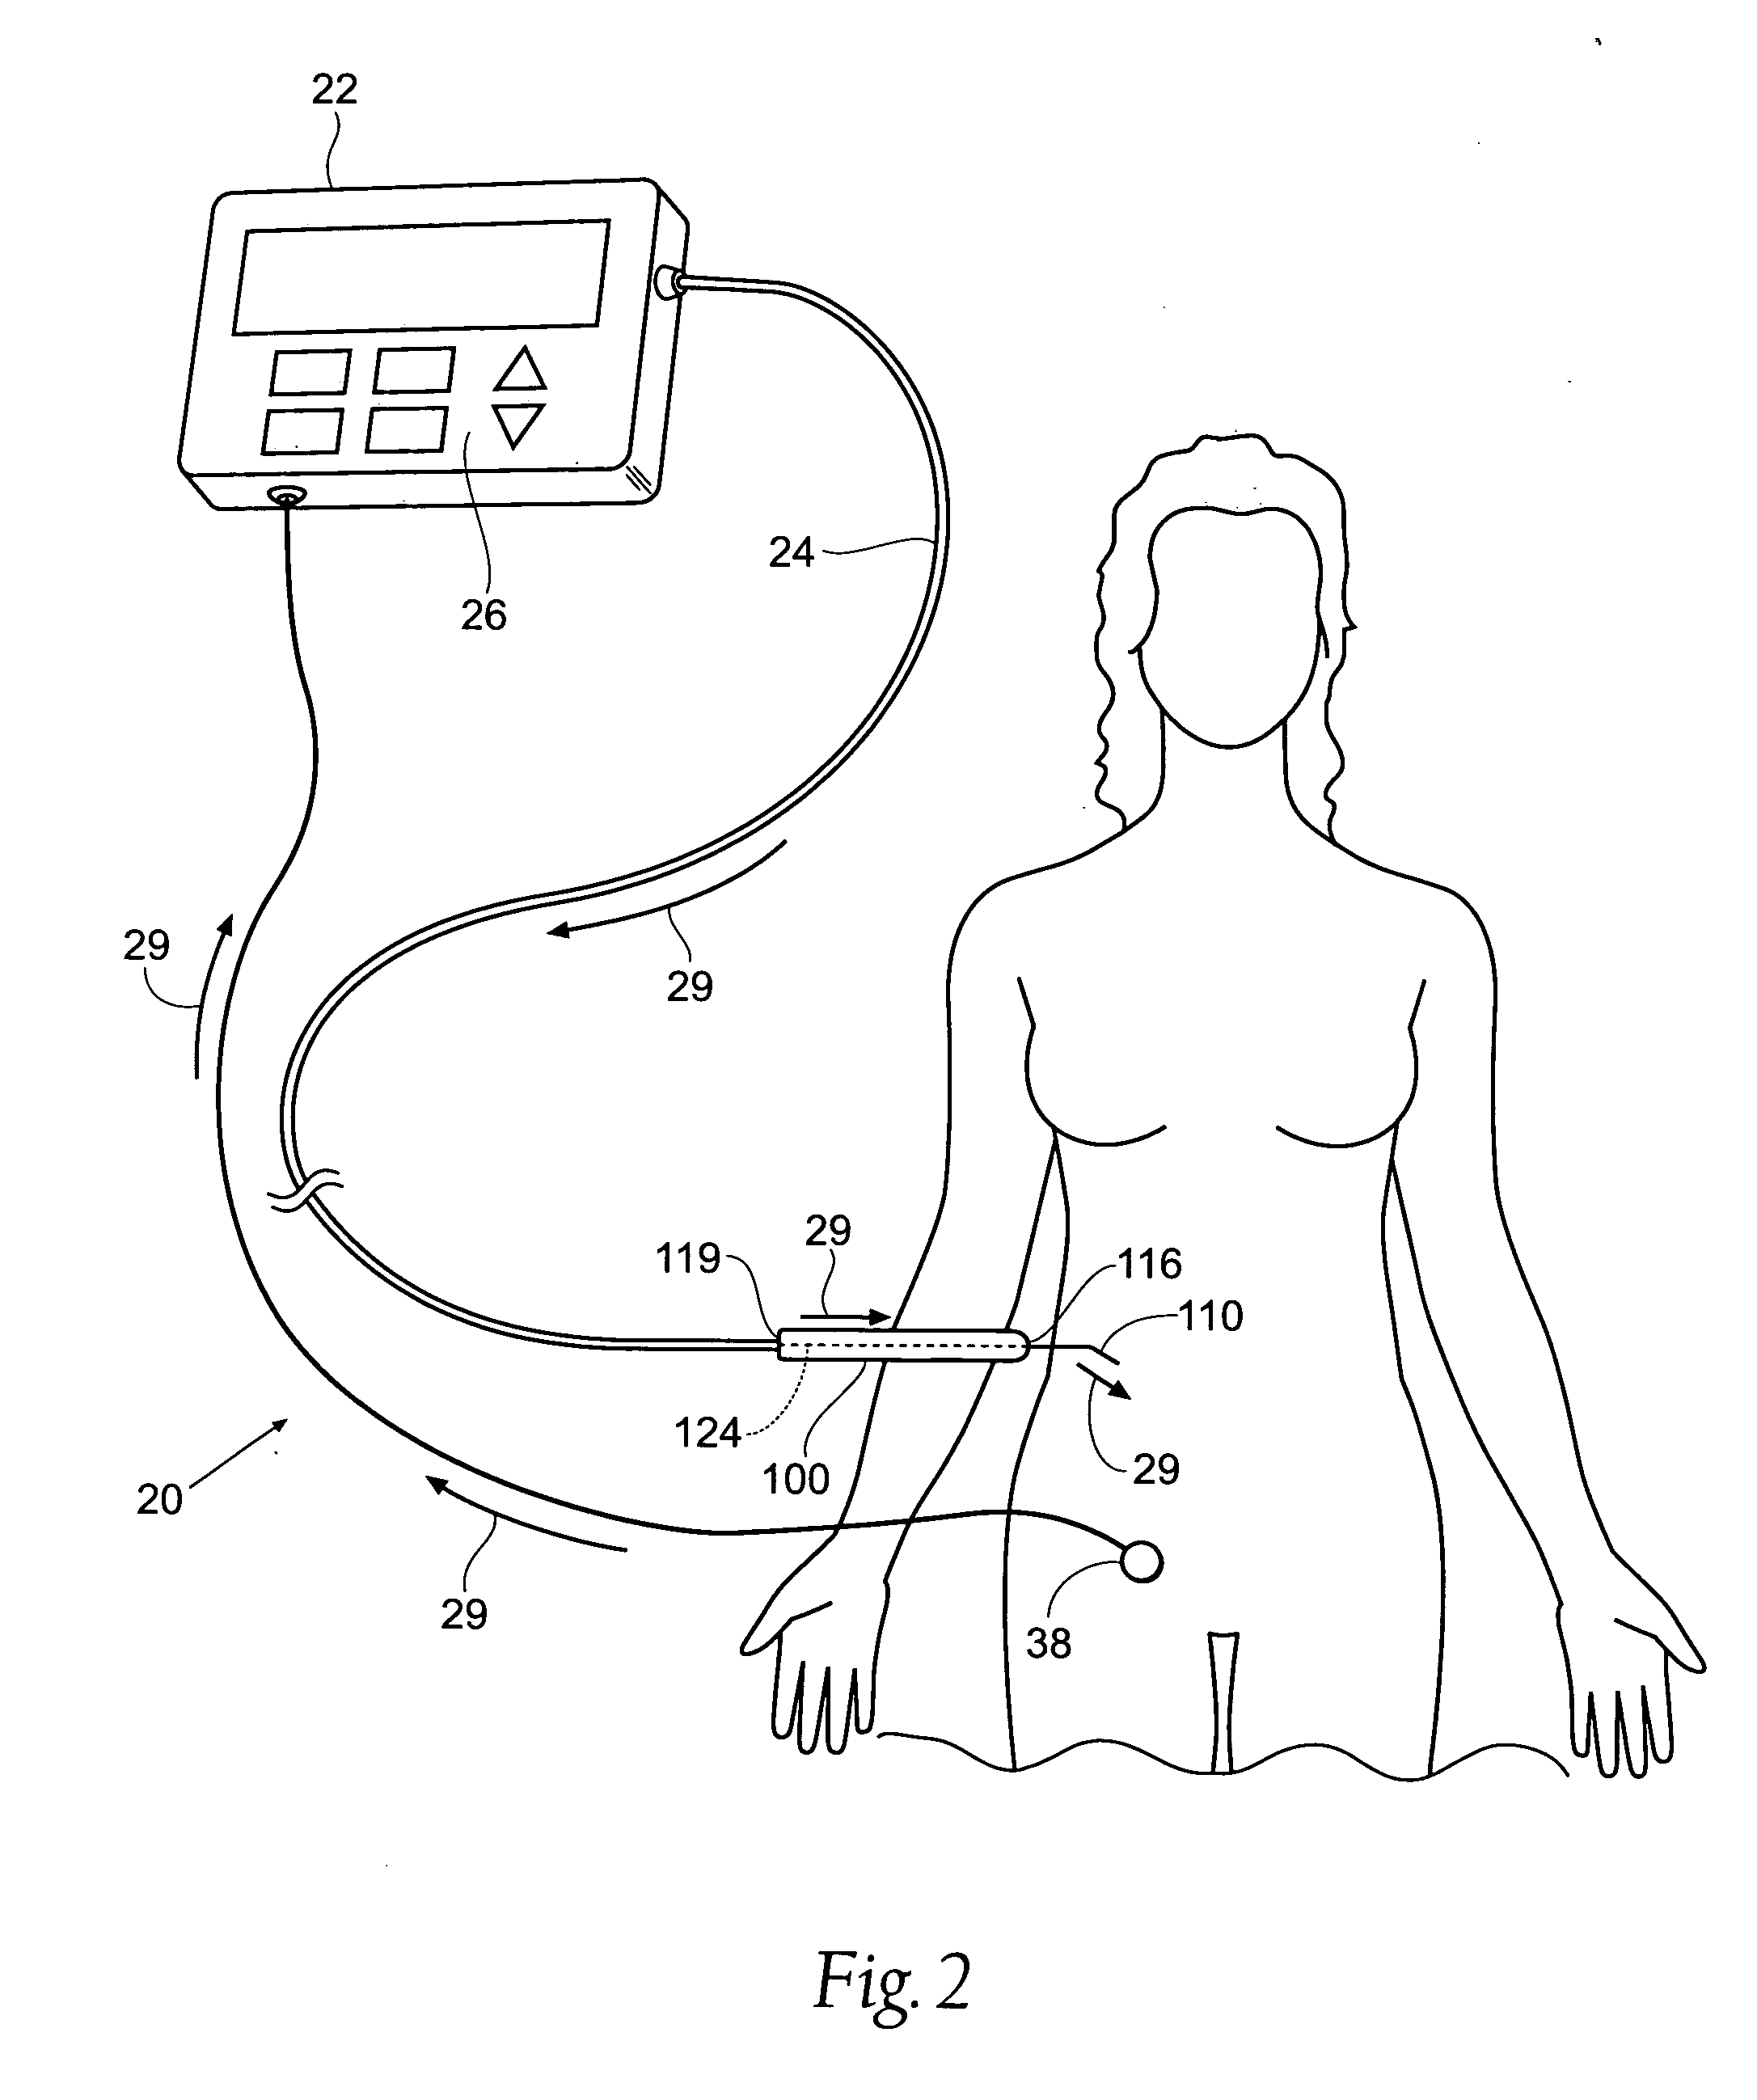 Systems and methods for intra-operative stimulation